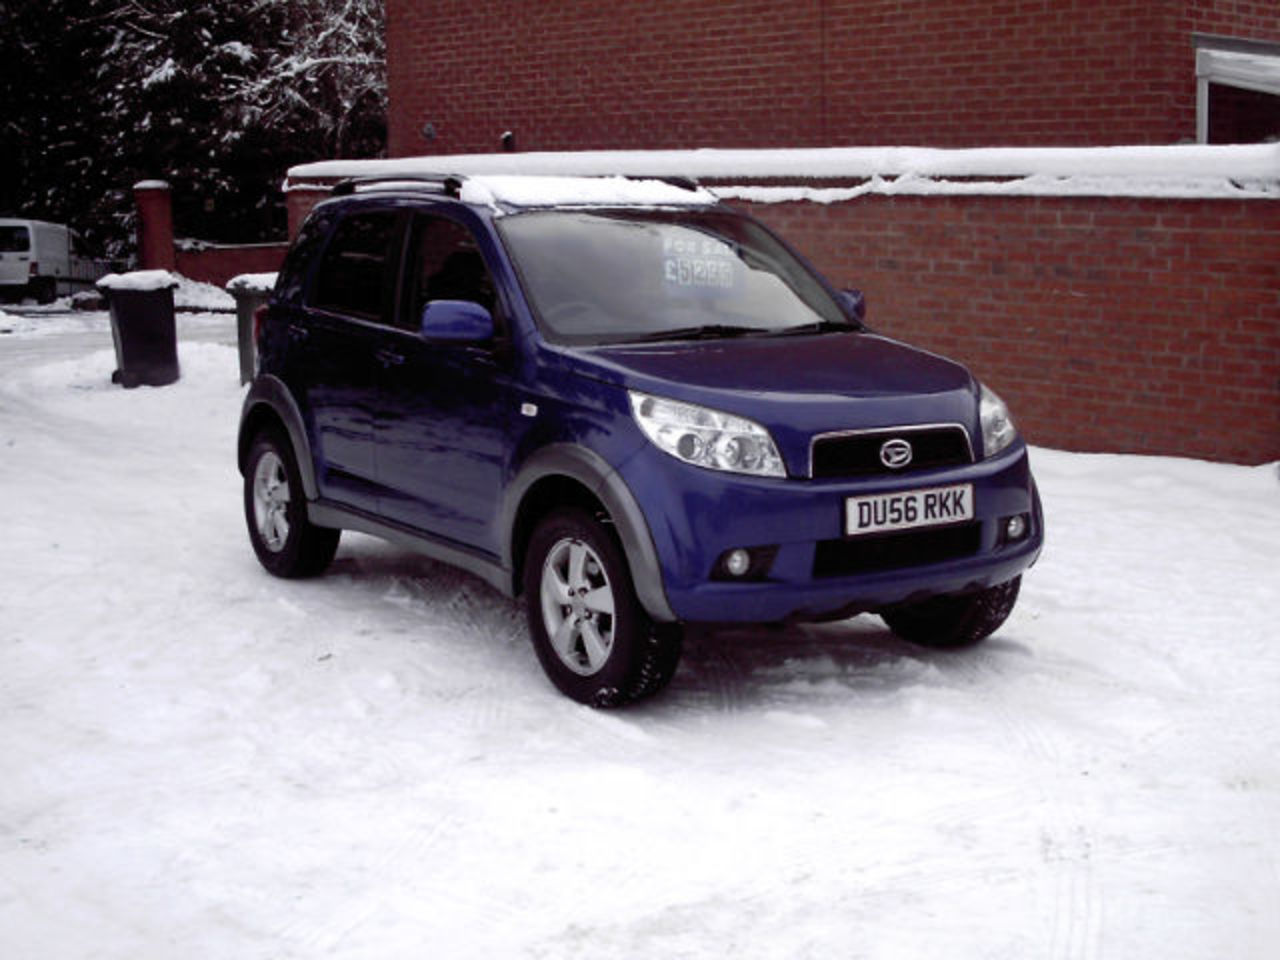 Used Daihatsu Terios 1.5 Sx for sale in Redditch, Worcestershire ...